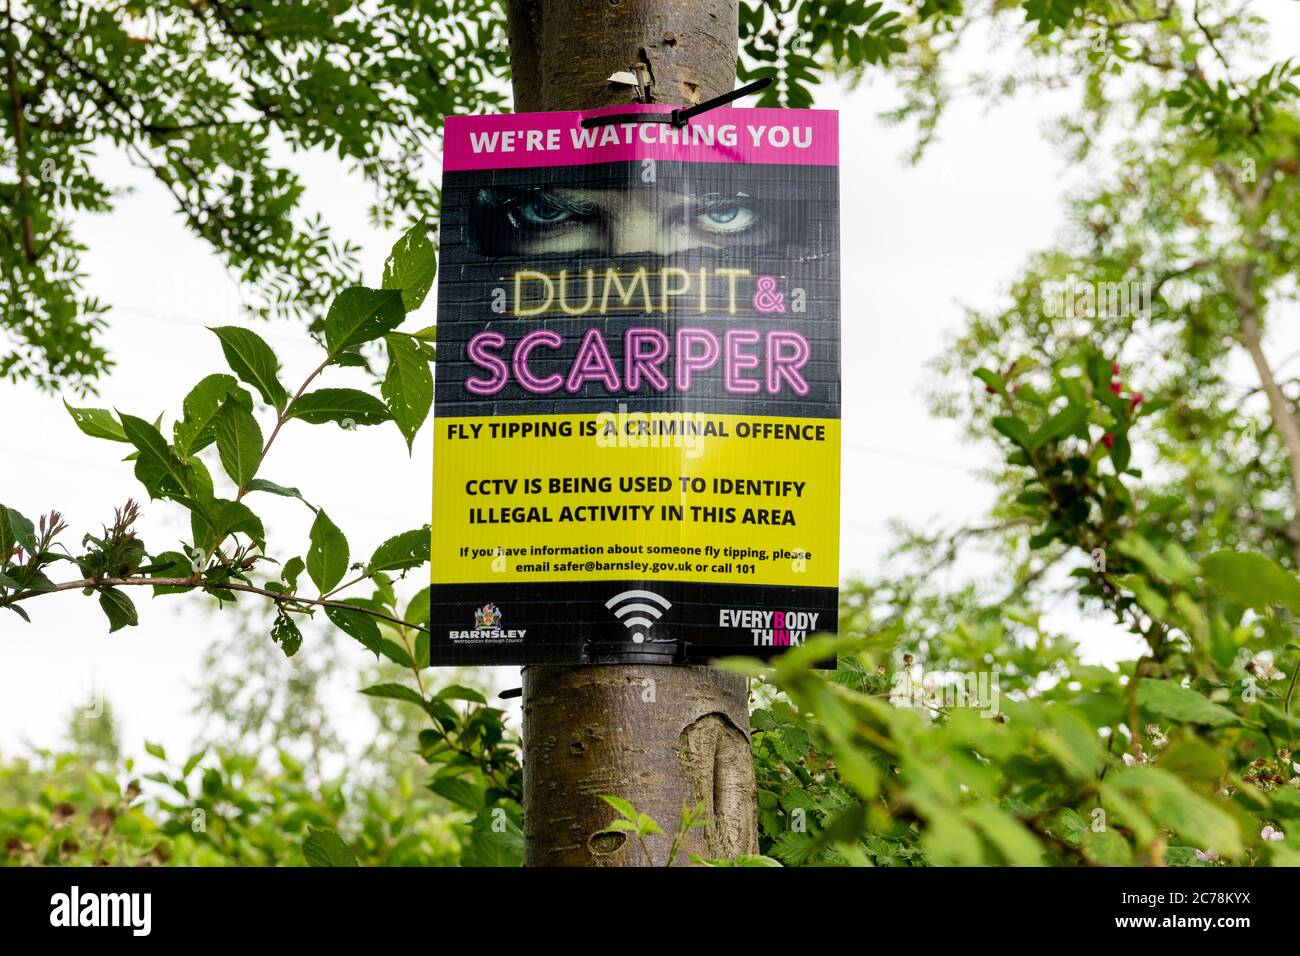 Barnsley Council Everybody Think Dumpit and Scarper anti fly tipping poster in rural area, Little Houghton, Barnsley, South Yorkshire, England, UK Stock Photo